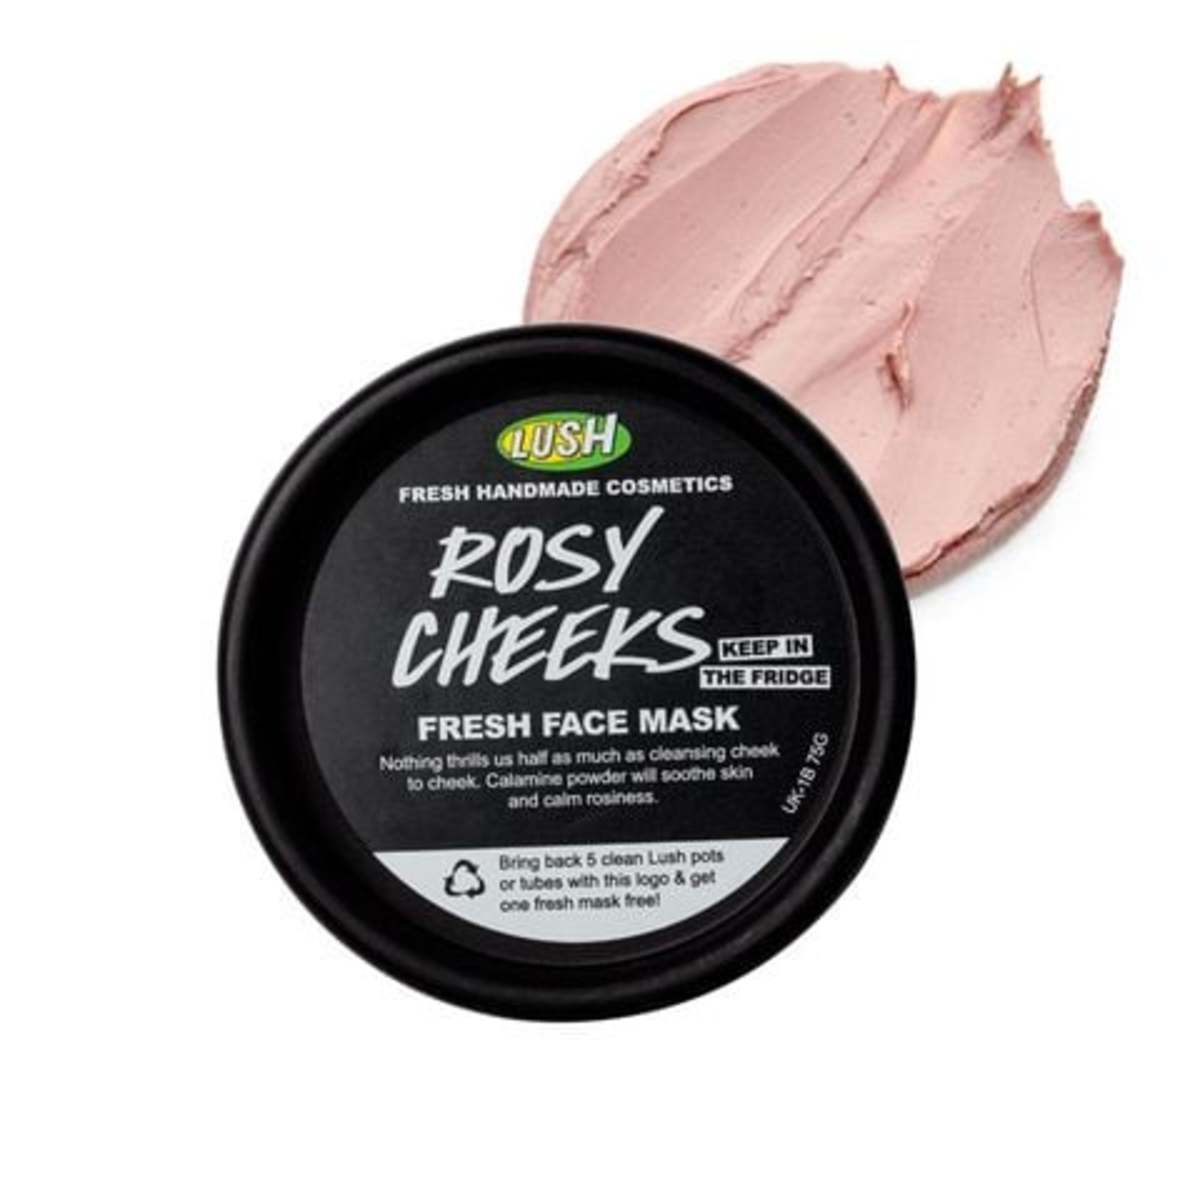 Lush Product Review: Rosy Cheeks Face Mask